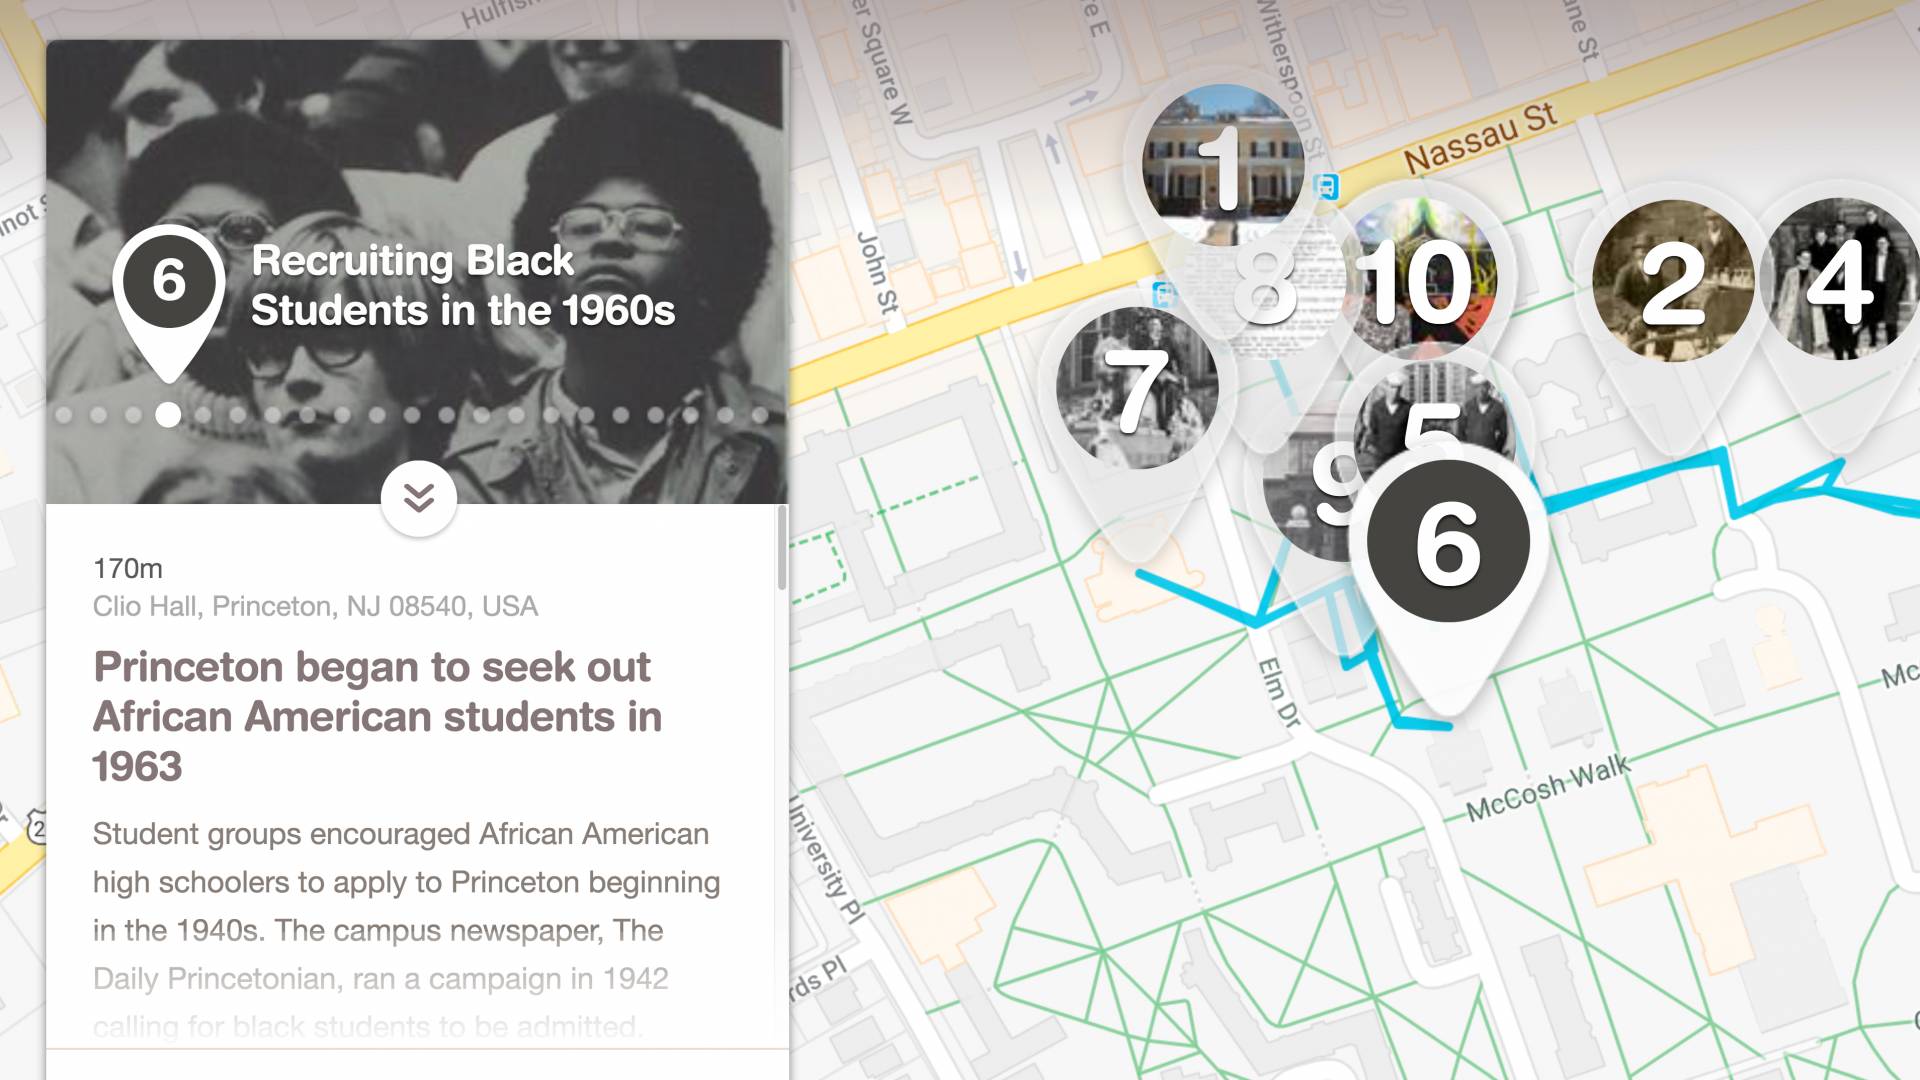 Screenshot of the African American history tour website showing stop number 6 at Clio Hall: Recruiting Black Students in the 1960s